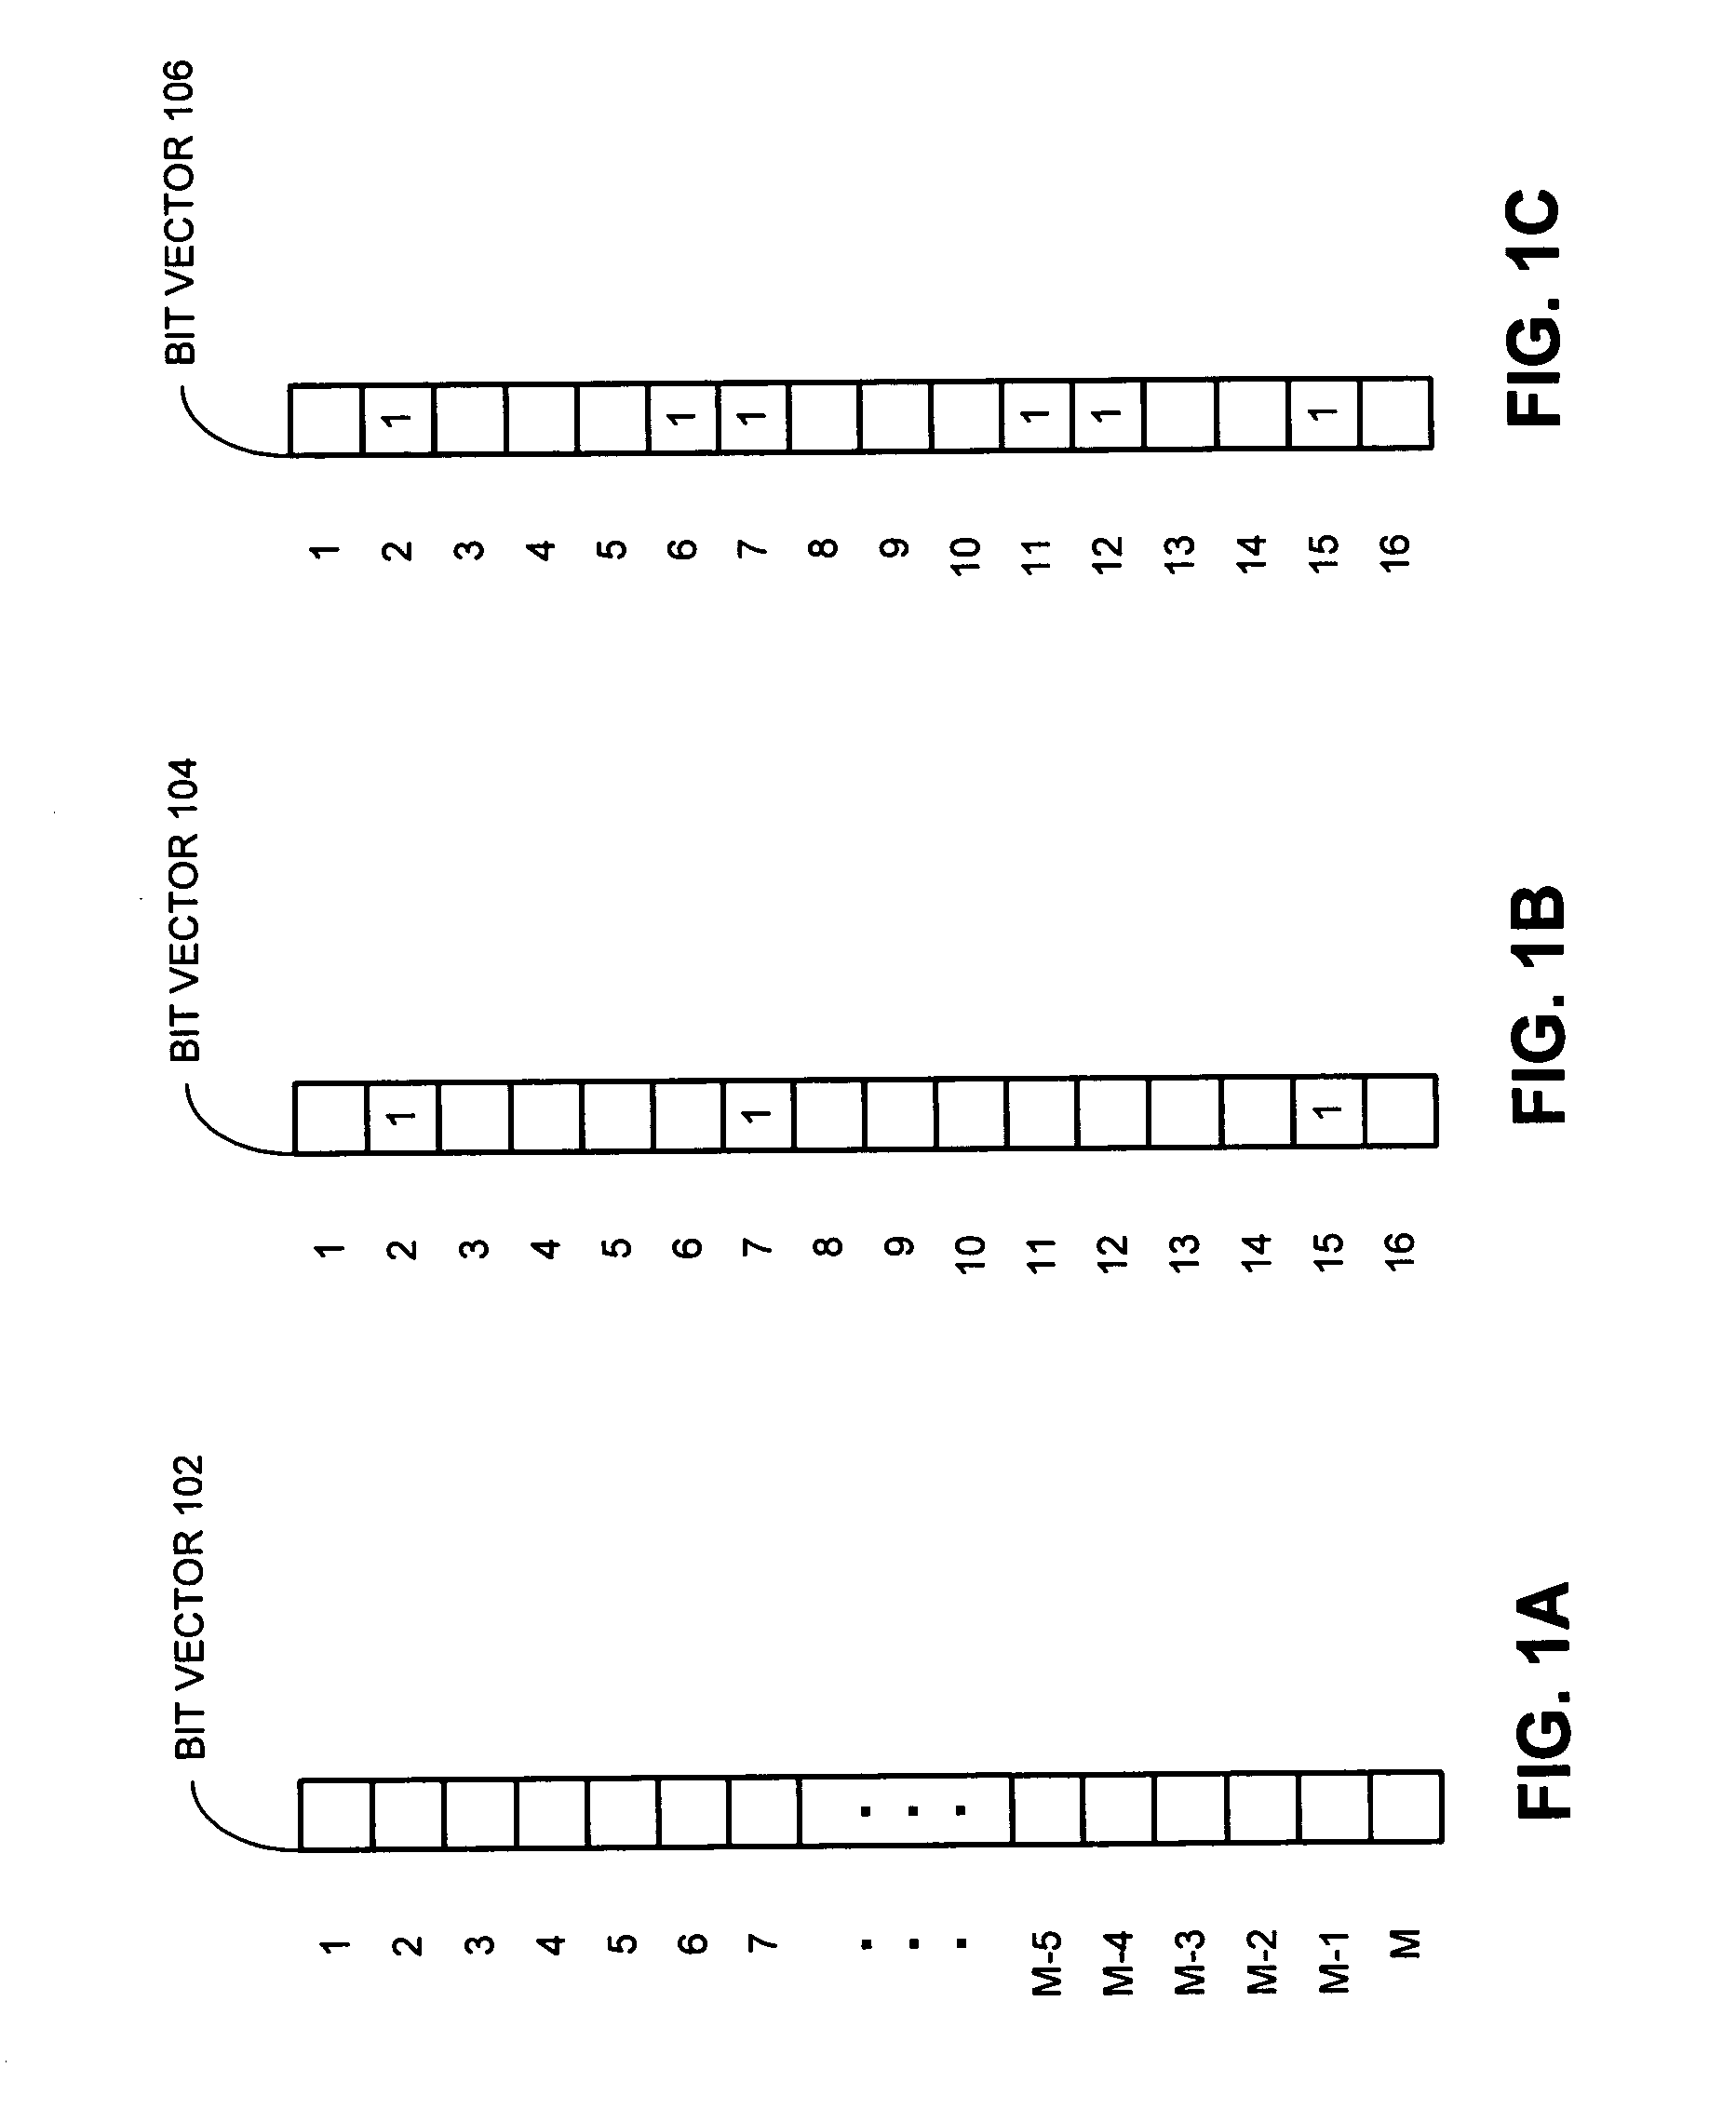 Method and apparatus for monitoring a data stream to detect a pattern of data elements